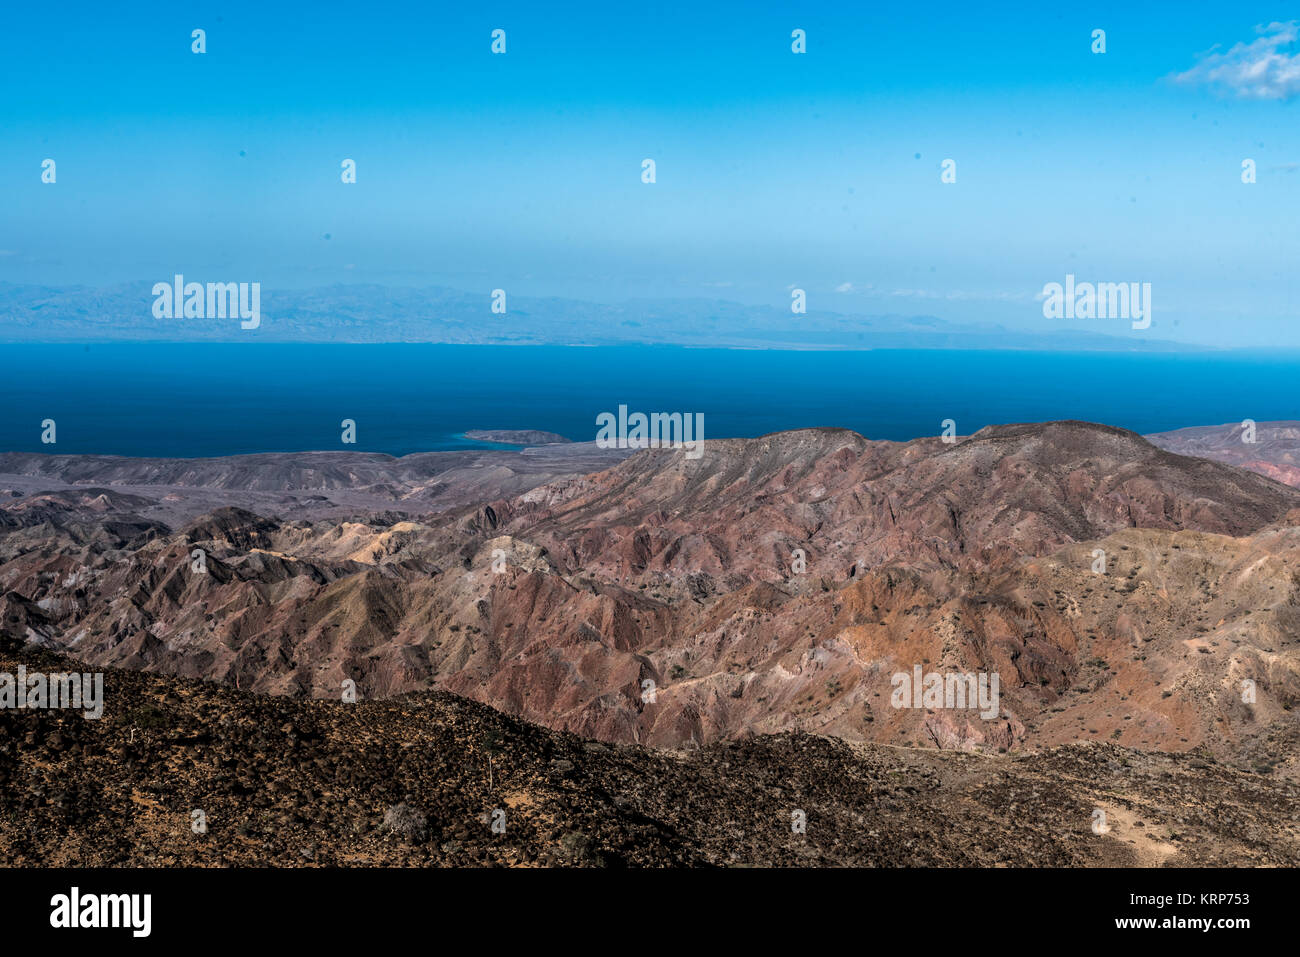 A view of the Gulf of Tadjoura from Arta, Djibouti, East Africa - Mountains of Arta Stock Photo